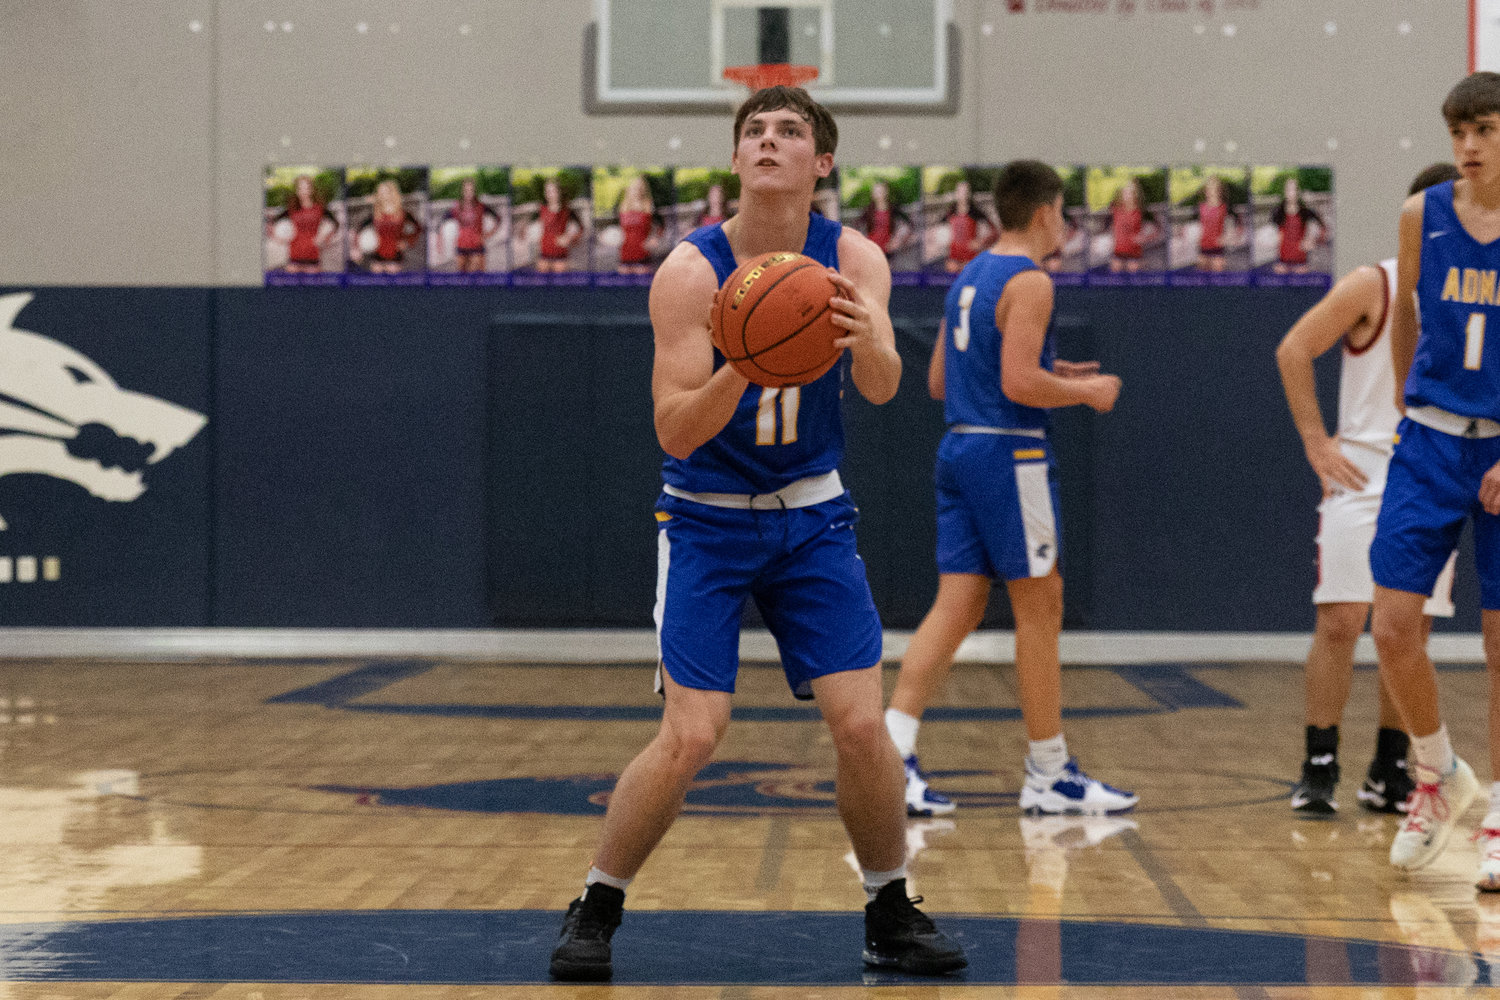 Adna guard Chase Collins attempts a free throw against Black Hills Dec. 2.